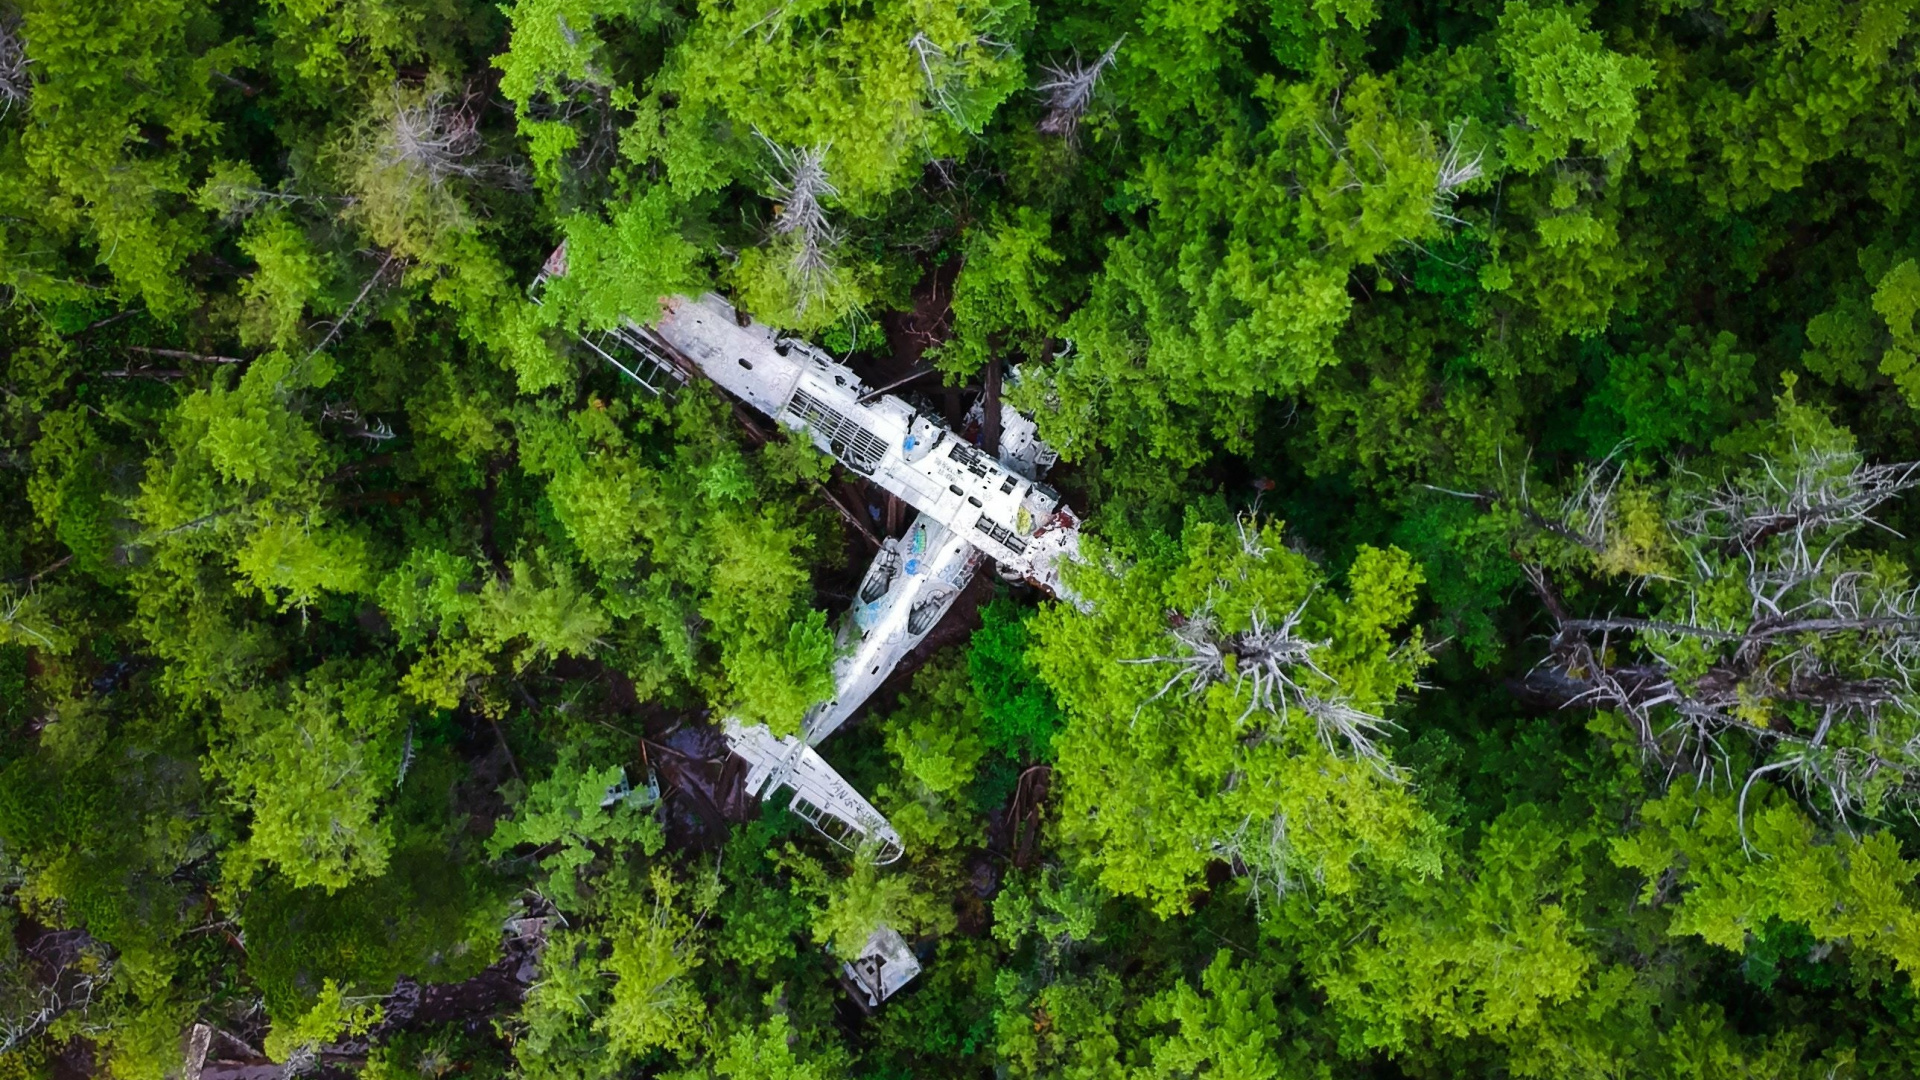 General 1920x1080 airplane forest nature wreck photography vehicle top view